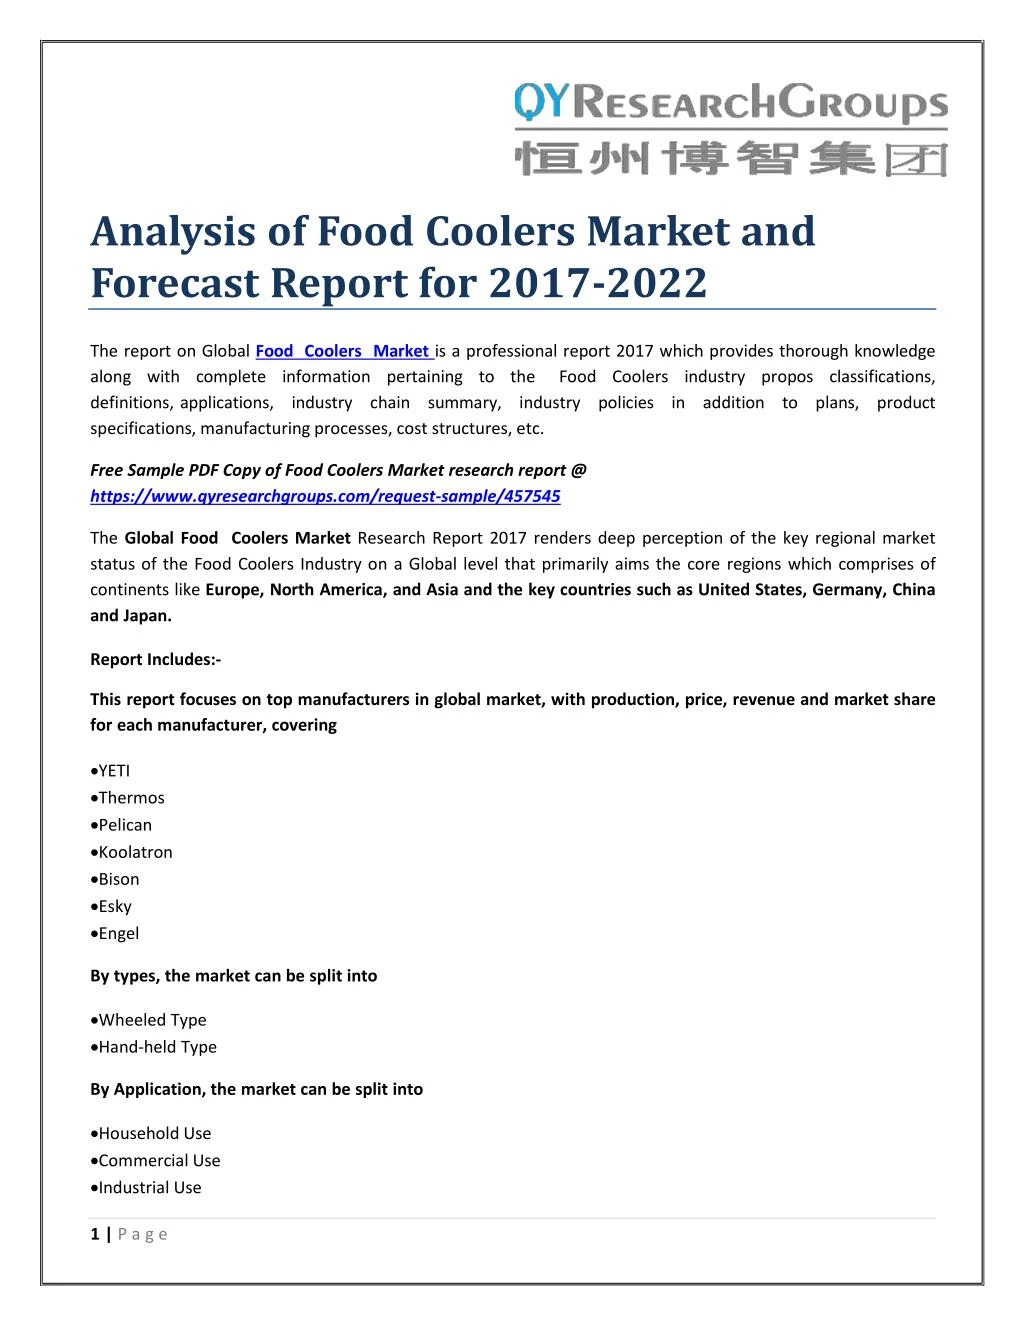 analysis of food coolers market and forecast